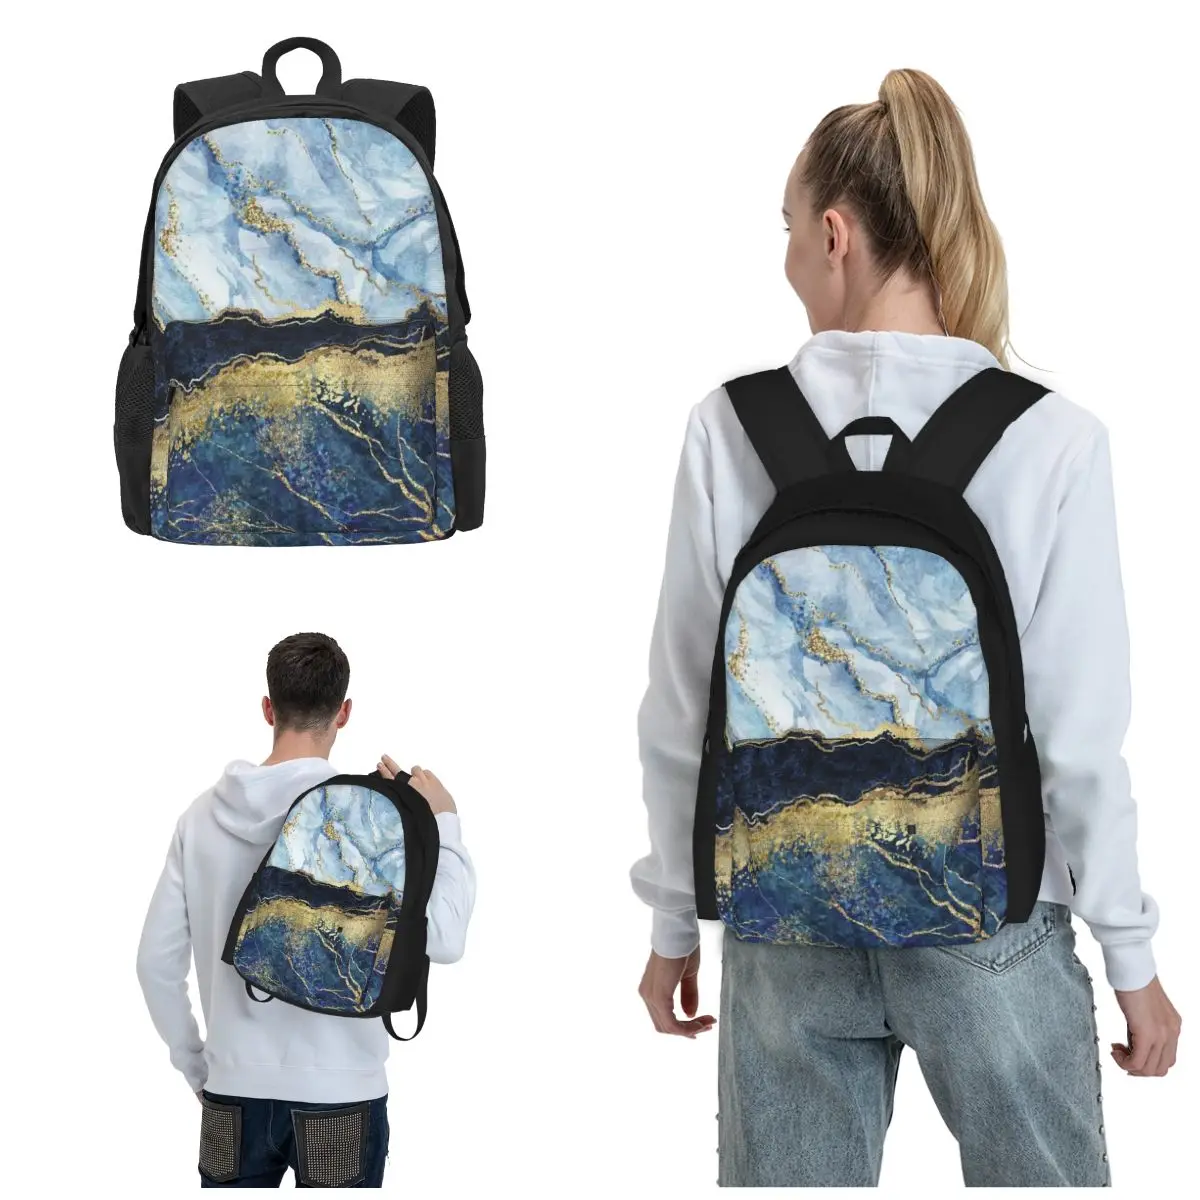 

Marbled Blue Bookbag Lightweight Stand Out From The Crowd With Our Selection Of Distinctive Backpacks High School College